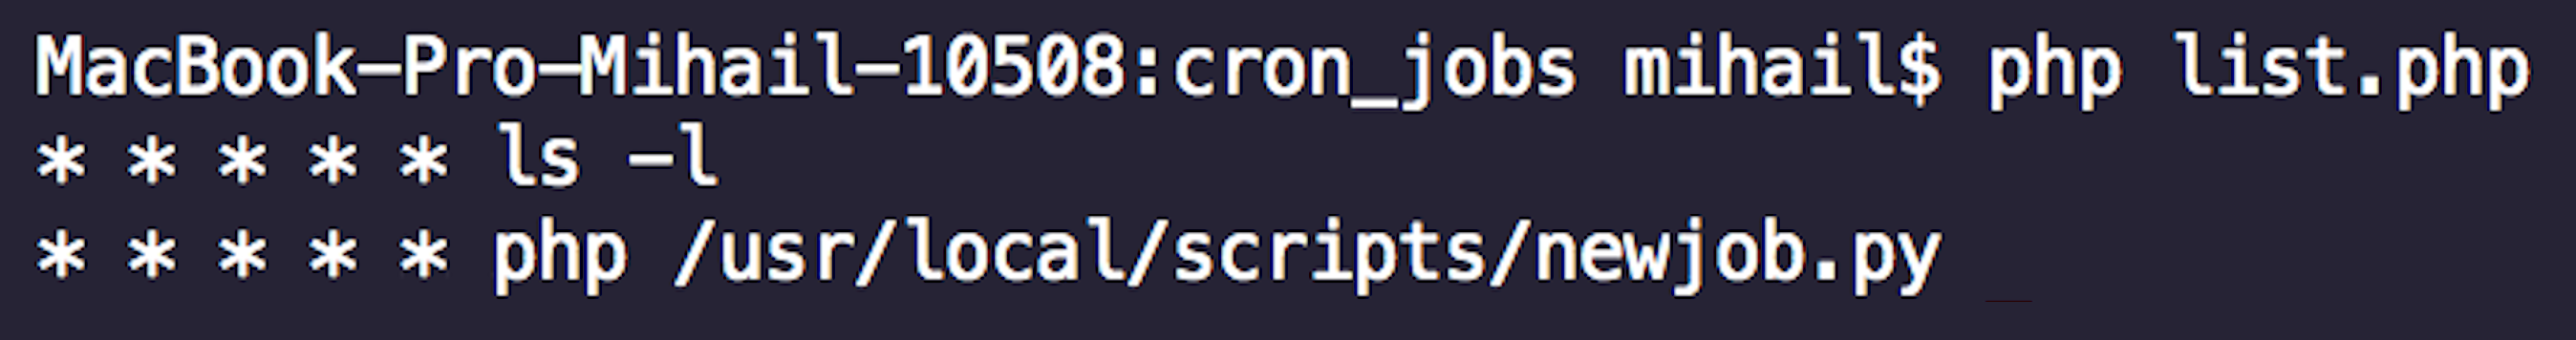 Executing PHP script to List Cron Jobs